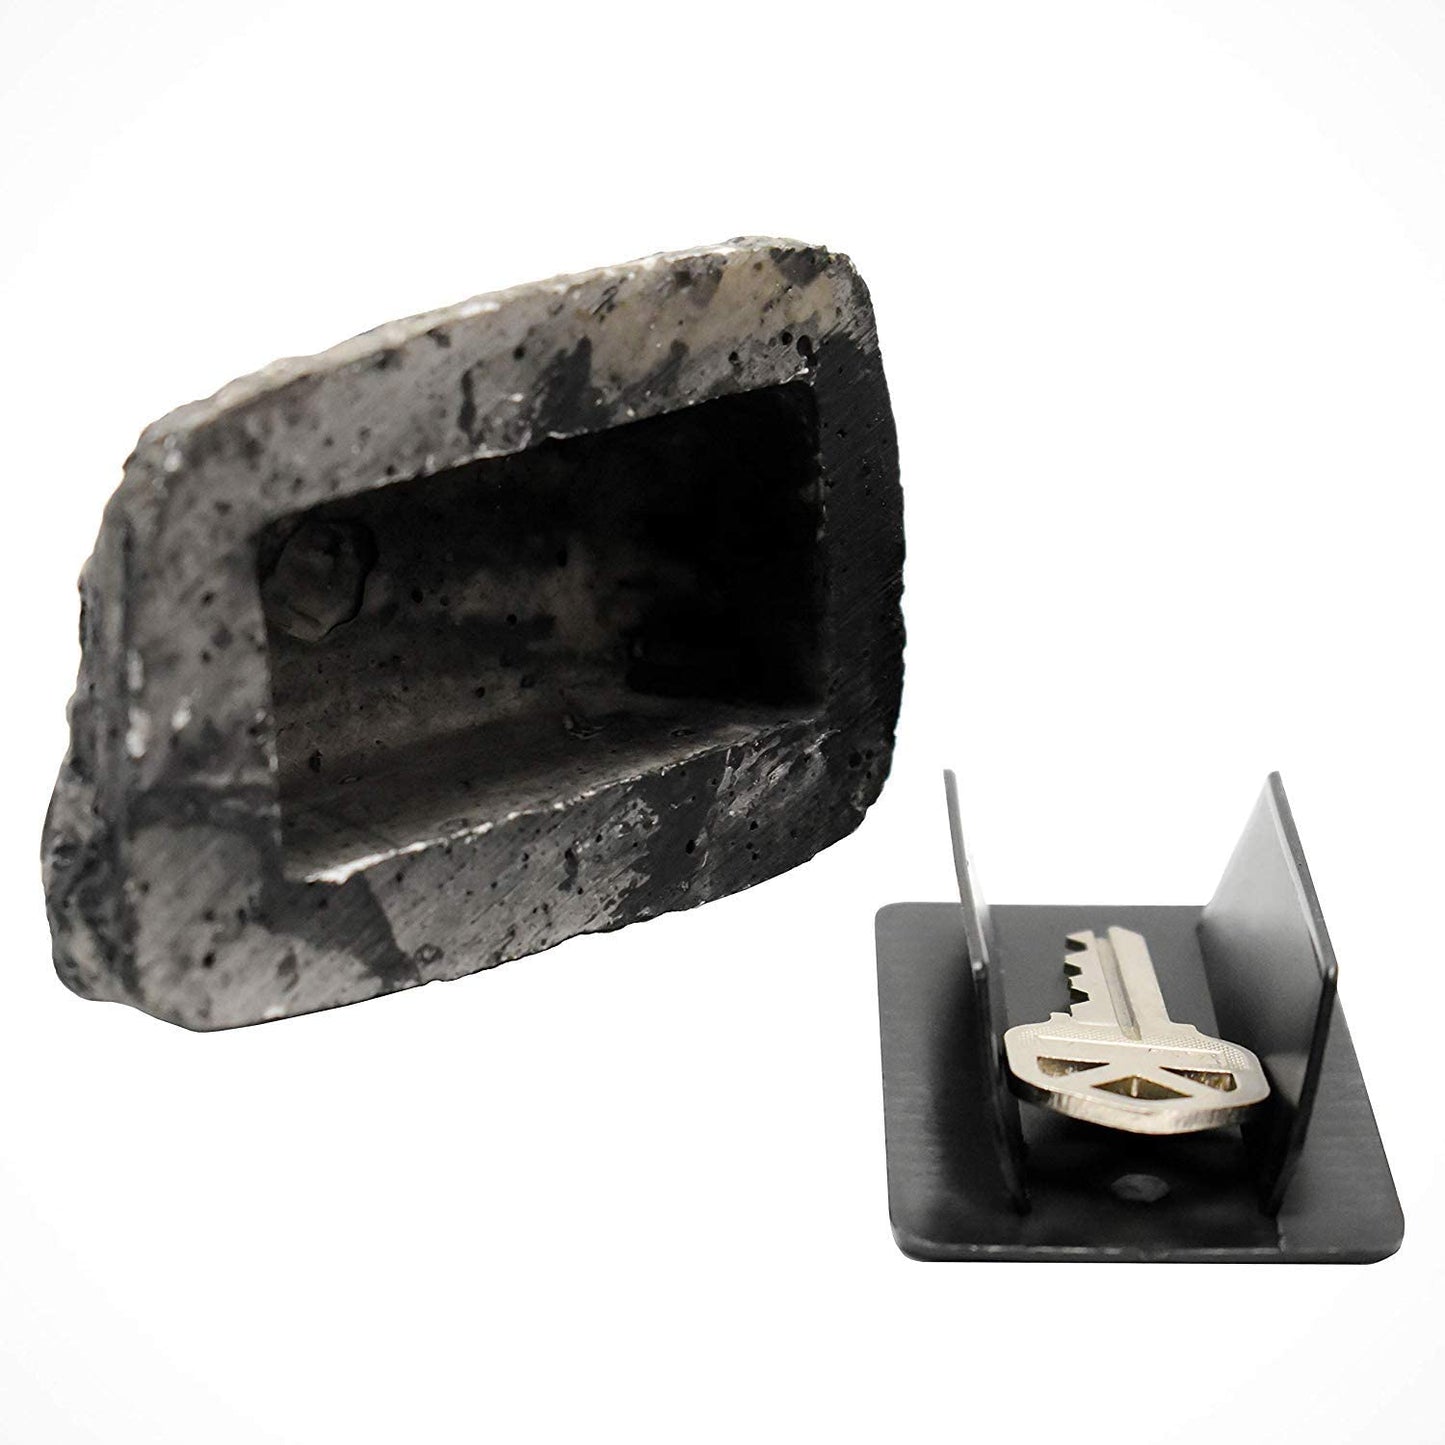 Hide A Key in a Real Looking Rock/Stone, Holds Standard Sized Spare Keys by Rockey Safe, Fits in with your Landscaping and Yard, Resistant to Outdoor Elements